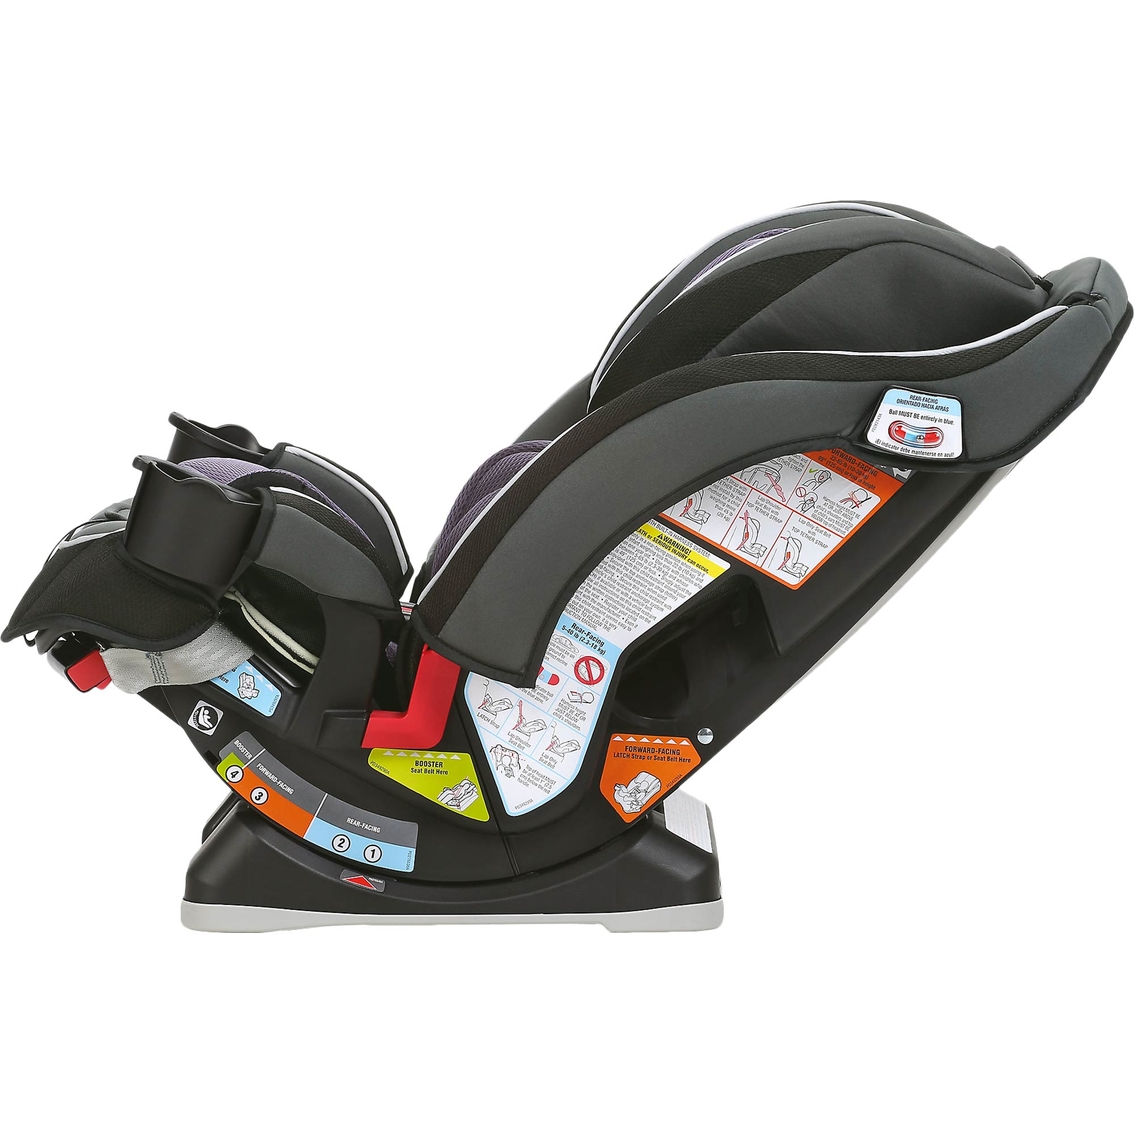 Graco SlimFit All in One Convertible Car Seat - Image 3 of 4